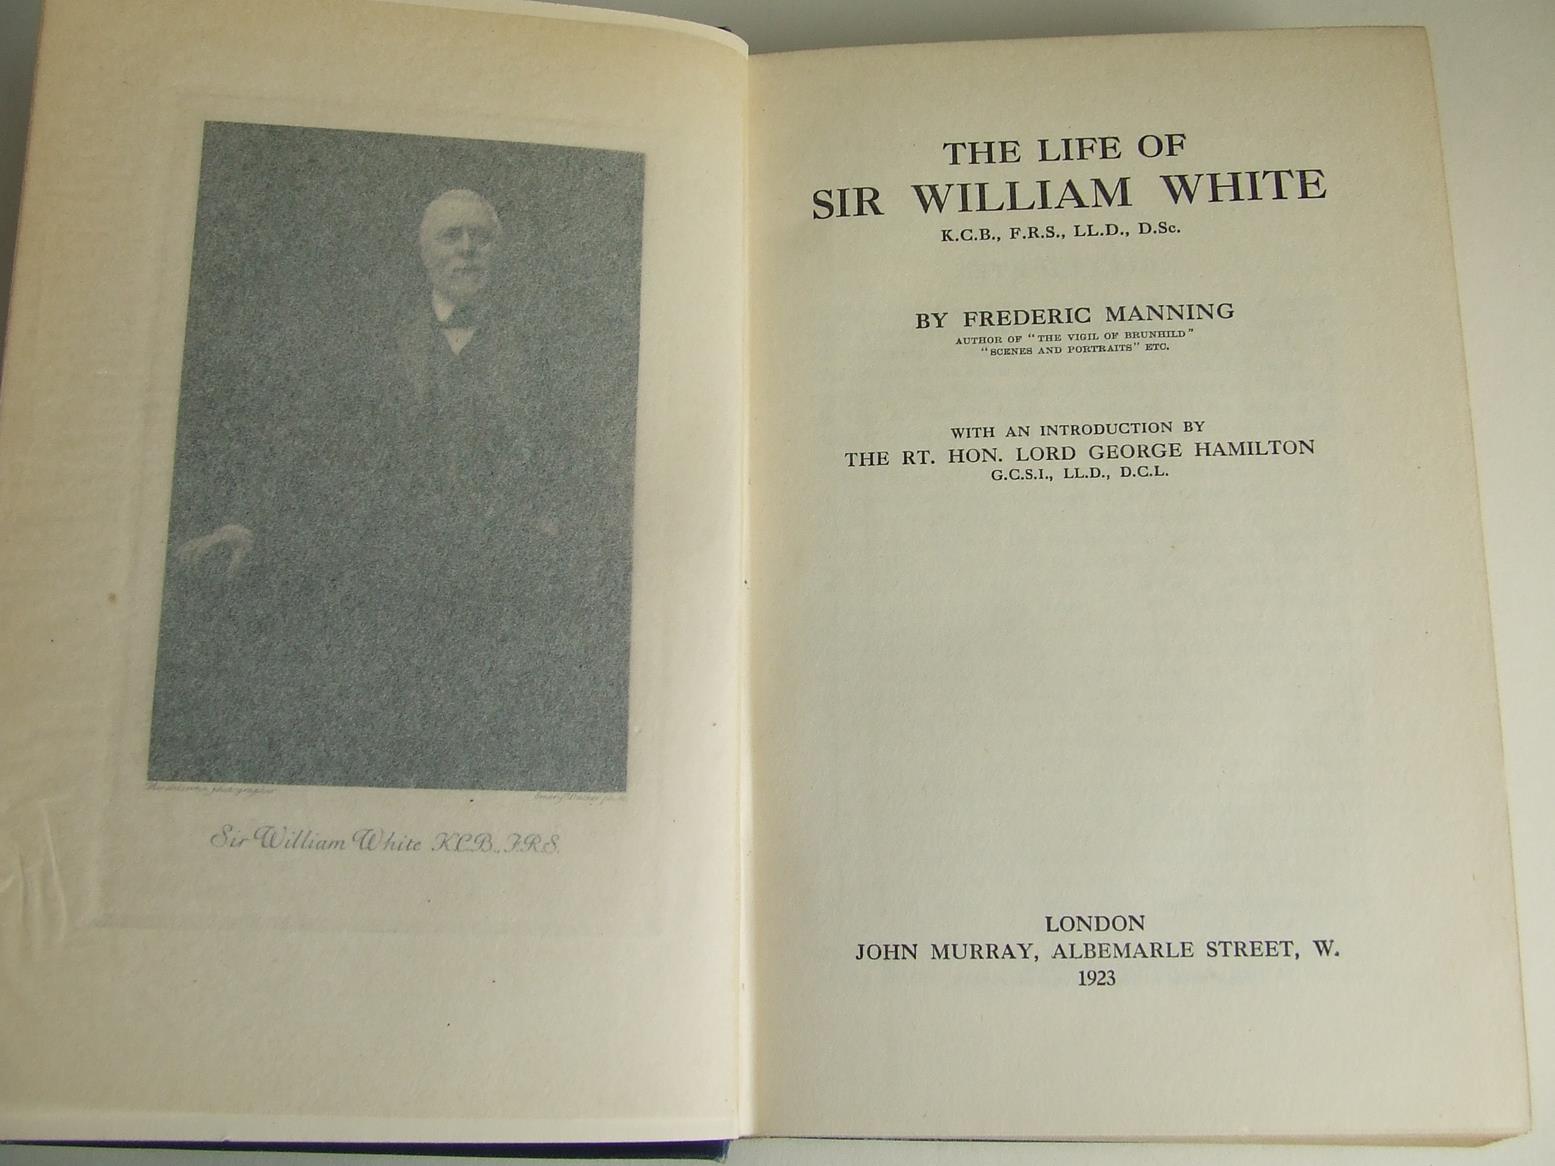 The Life of Sir William White